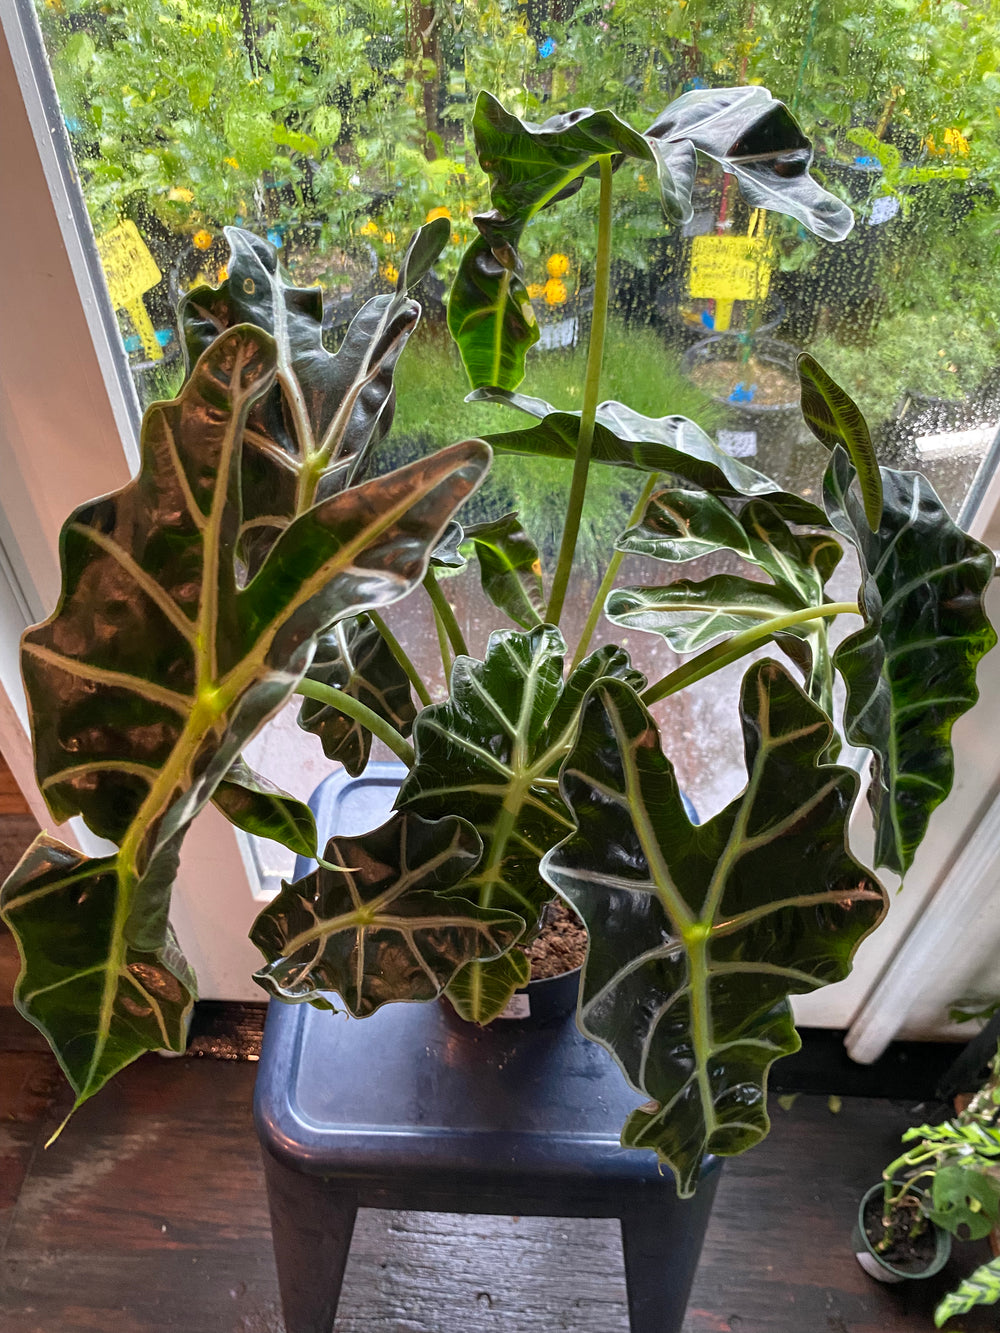 Alocasia 'African Mask'